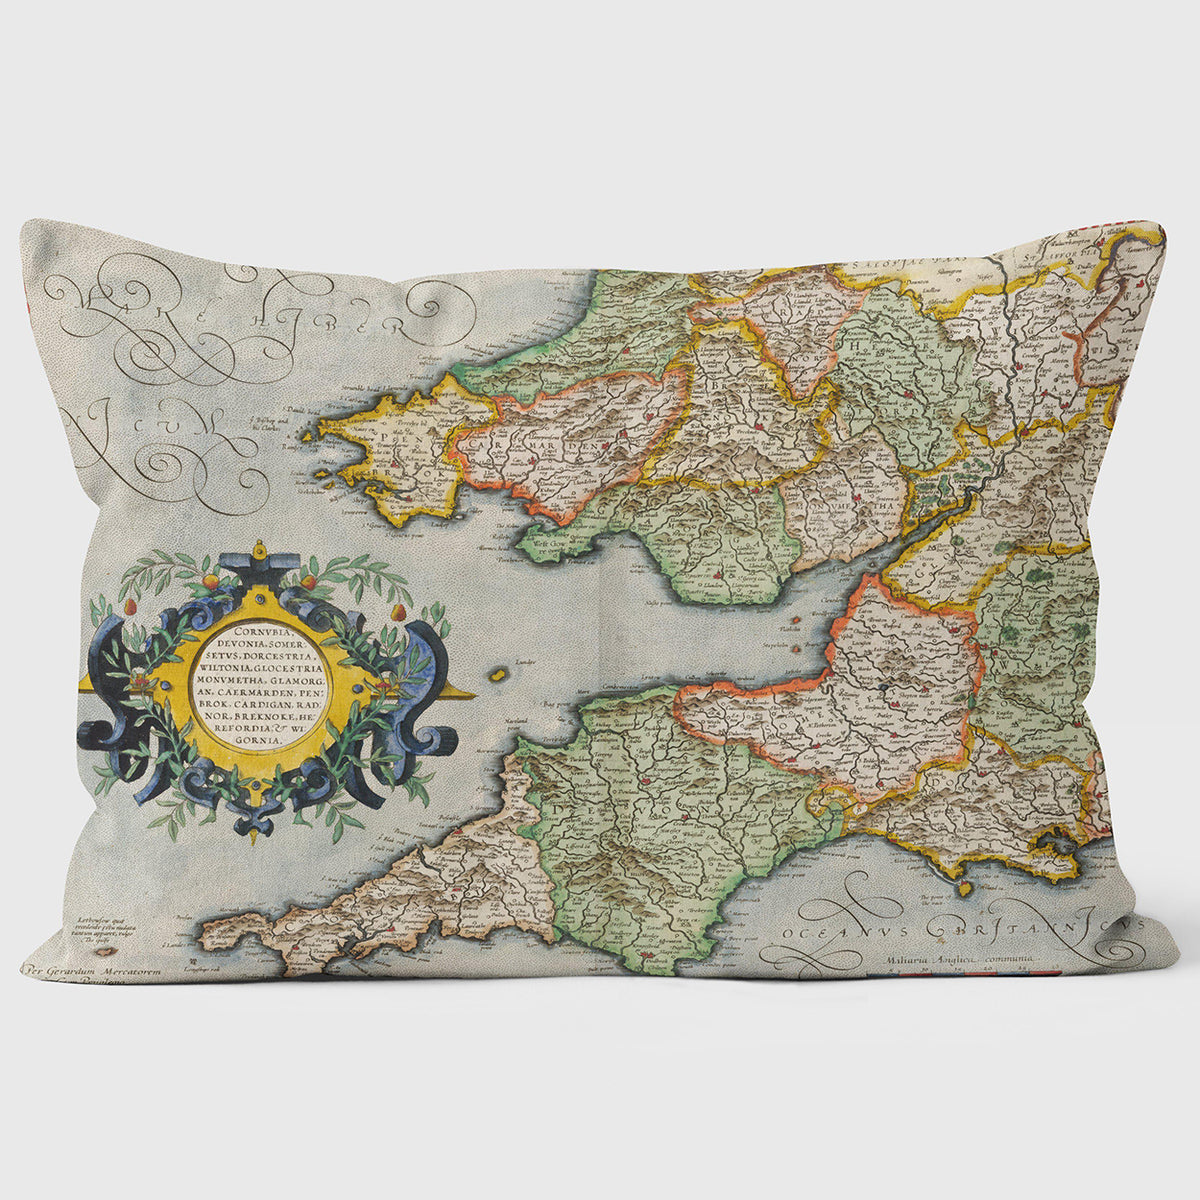 1595 South-West and South Wales Map Cushion